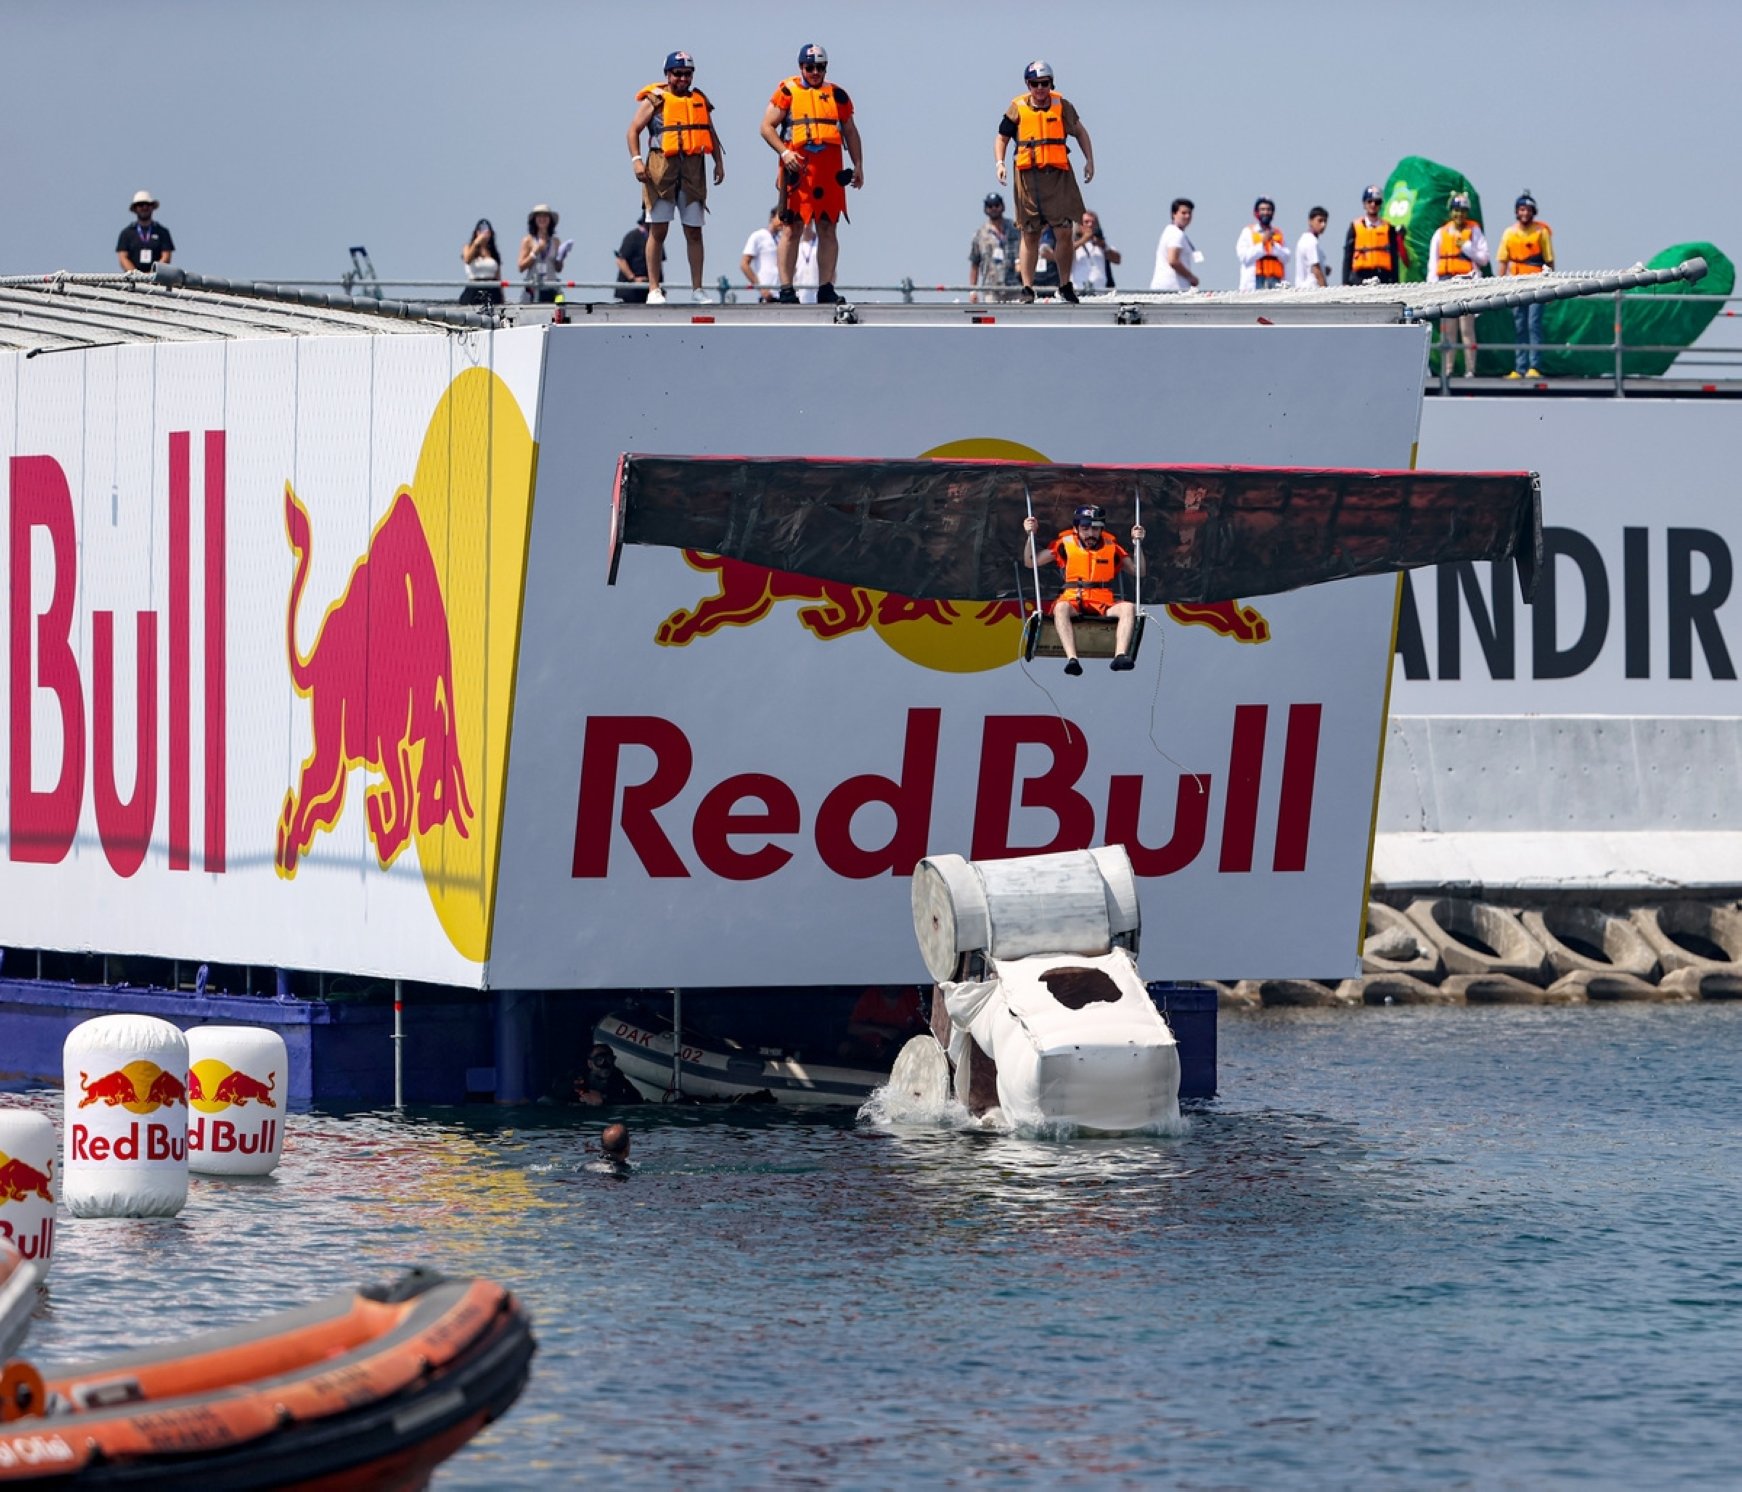 Inaugural Flugtag in Brazil gives locals wings